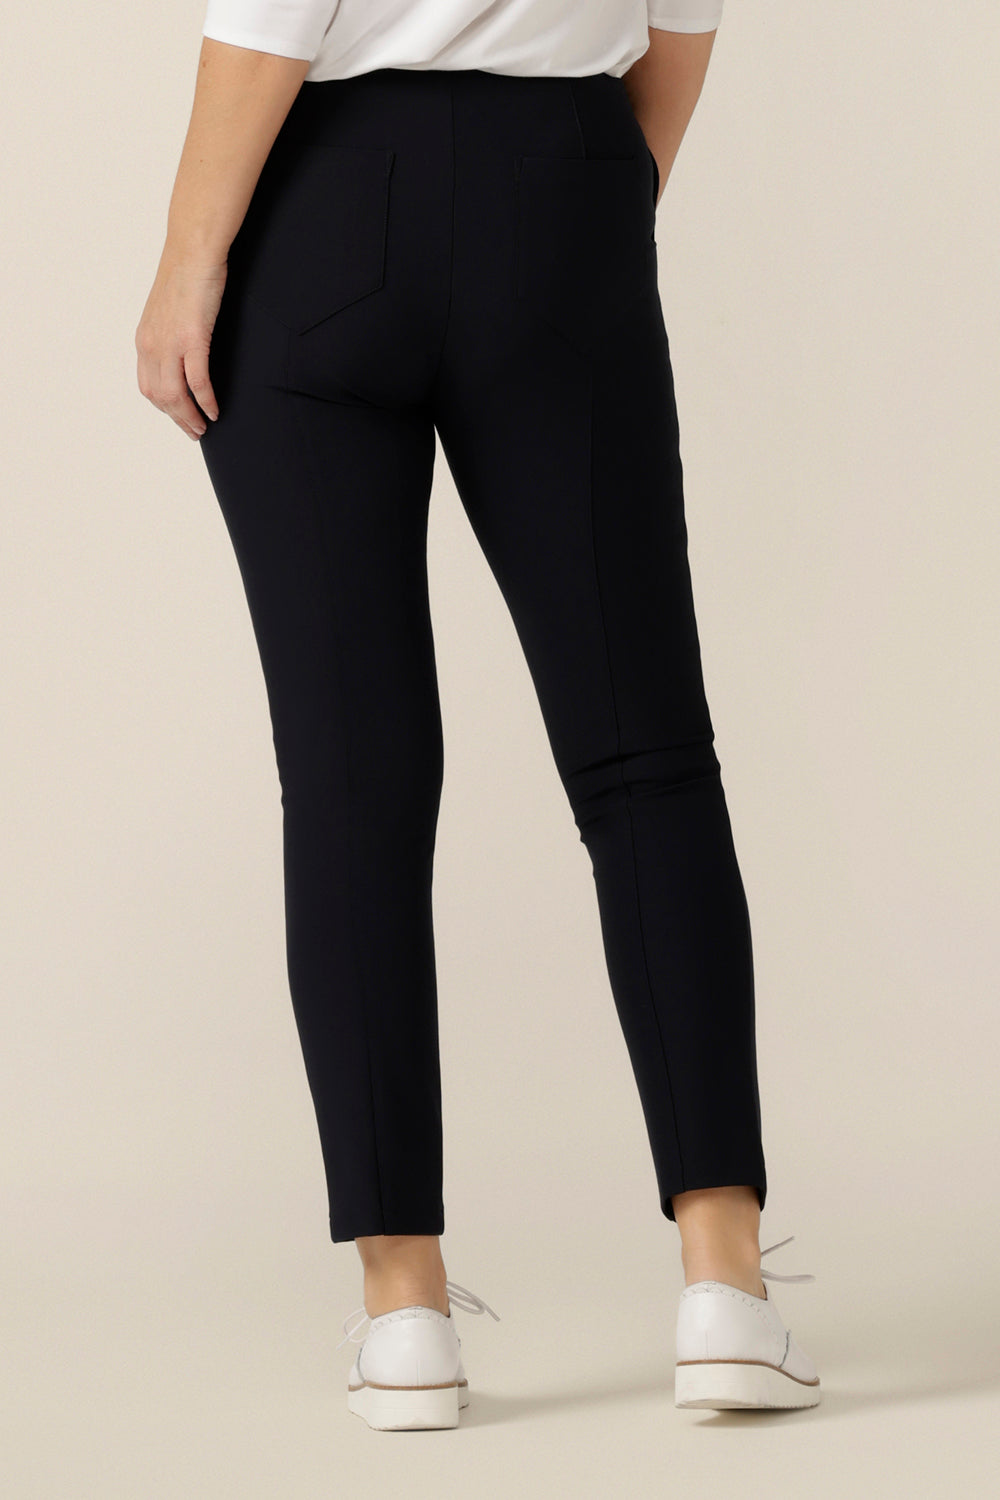 Brooklyn Pant in Navy | Leina & Fleur Pants for Work & Play – L&F ...